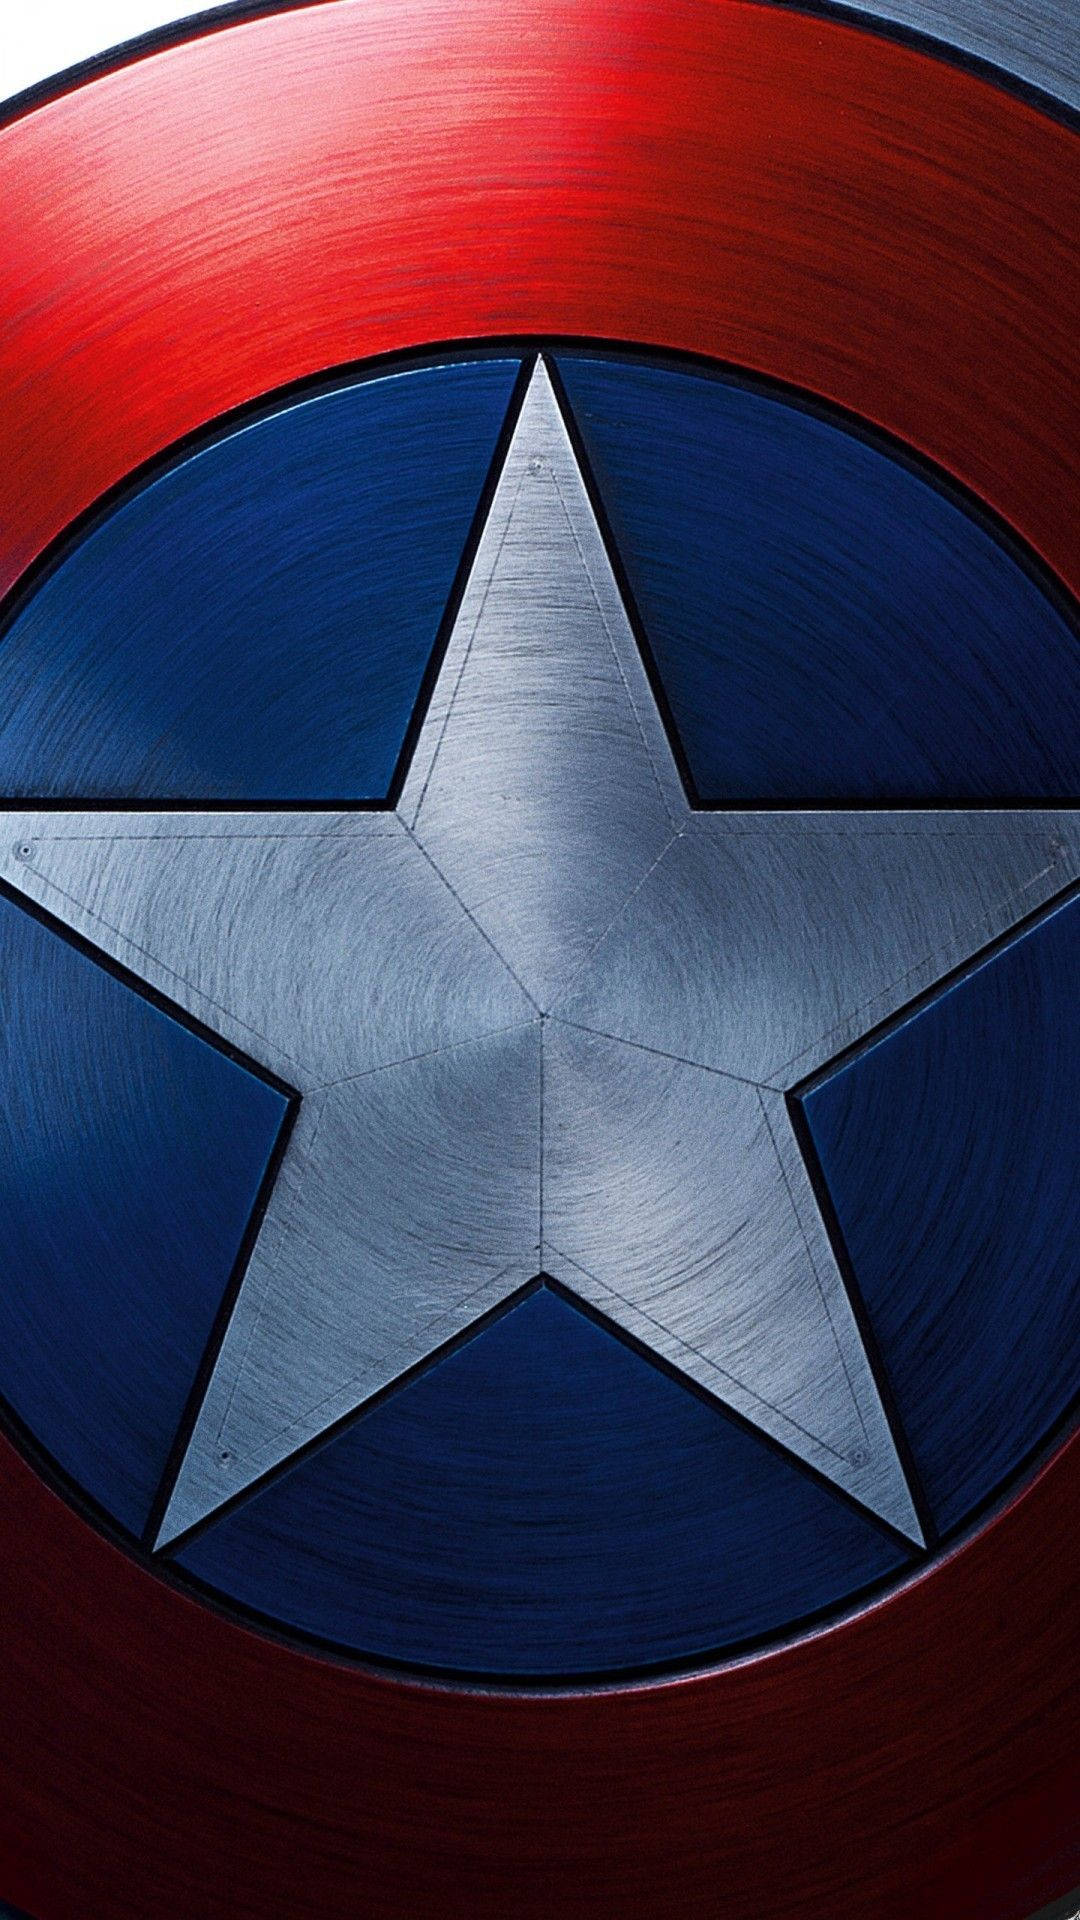 Caption: Close-up of Captain America's Shield on an iPhone Screen Wallpaper